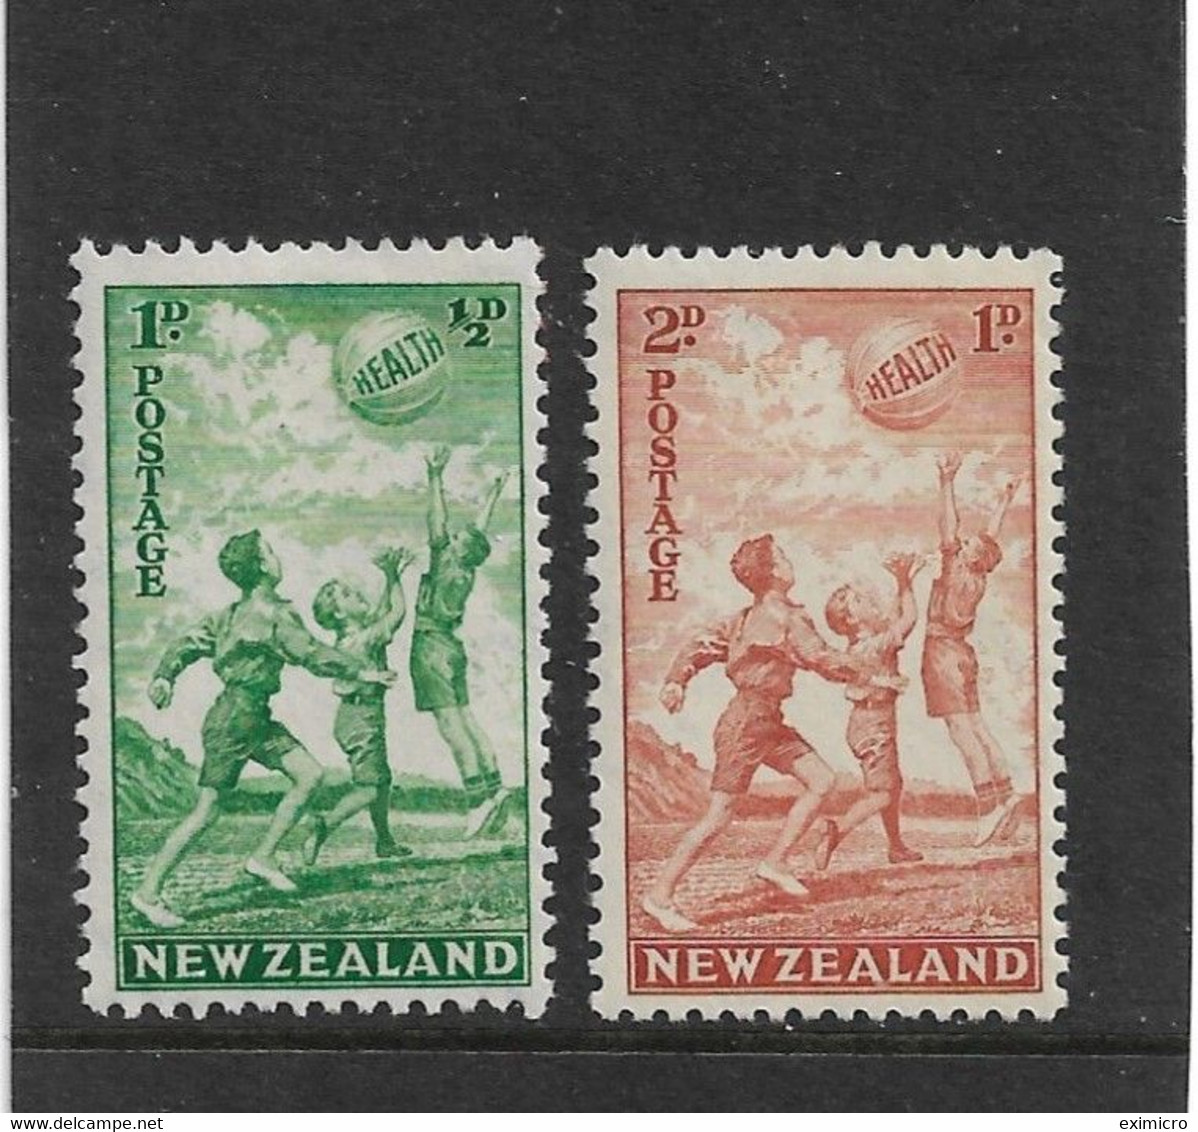 NEW ZEALAND 1940 HEALTH SET SG 626/627 MOUNTED MINT Cat £18 - Unused Stamps